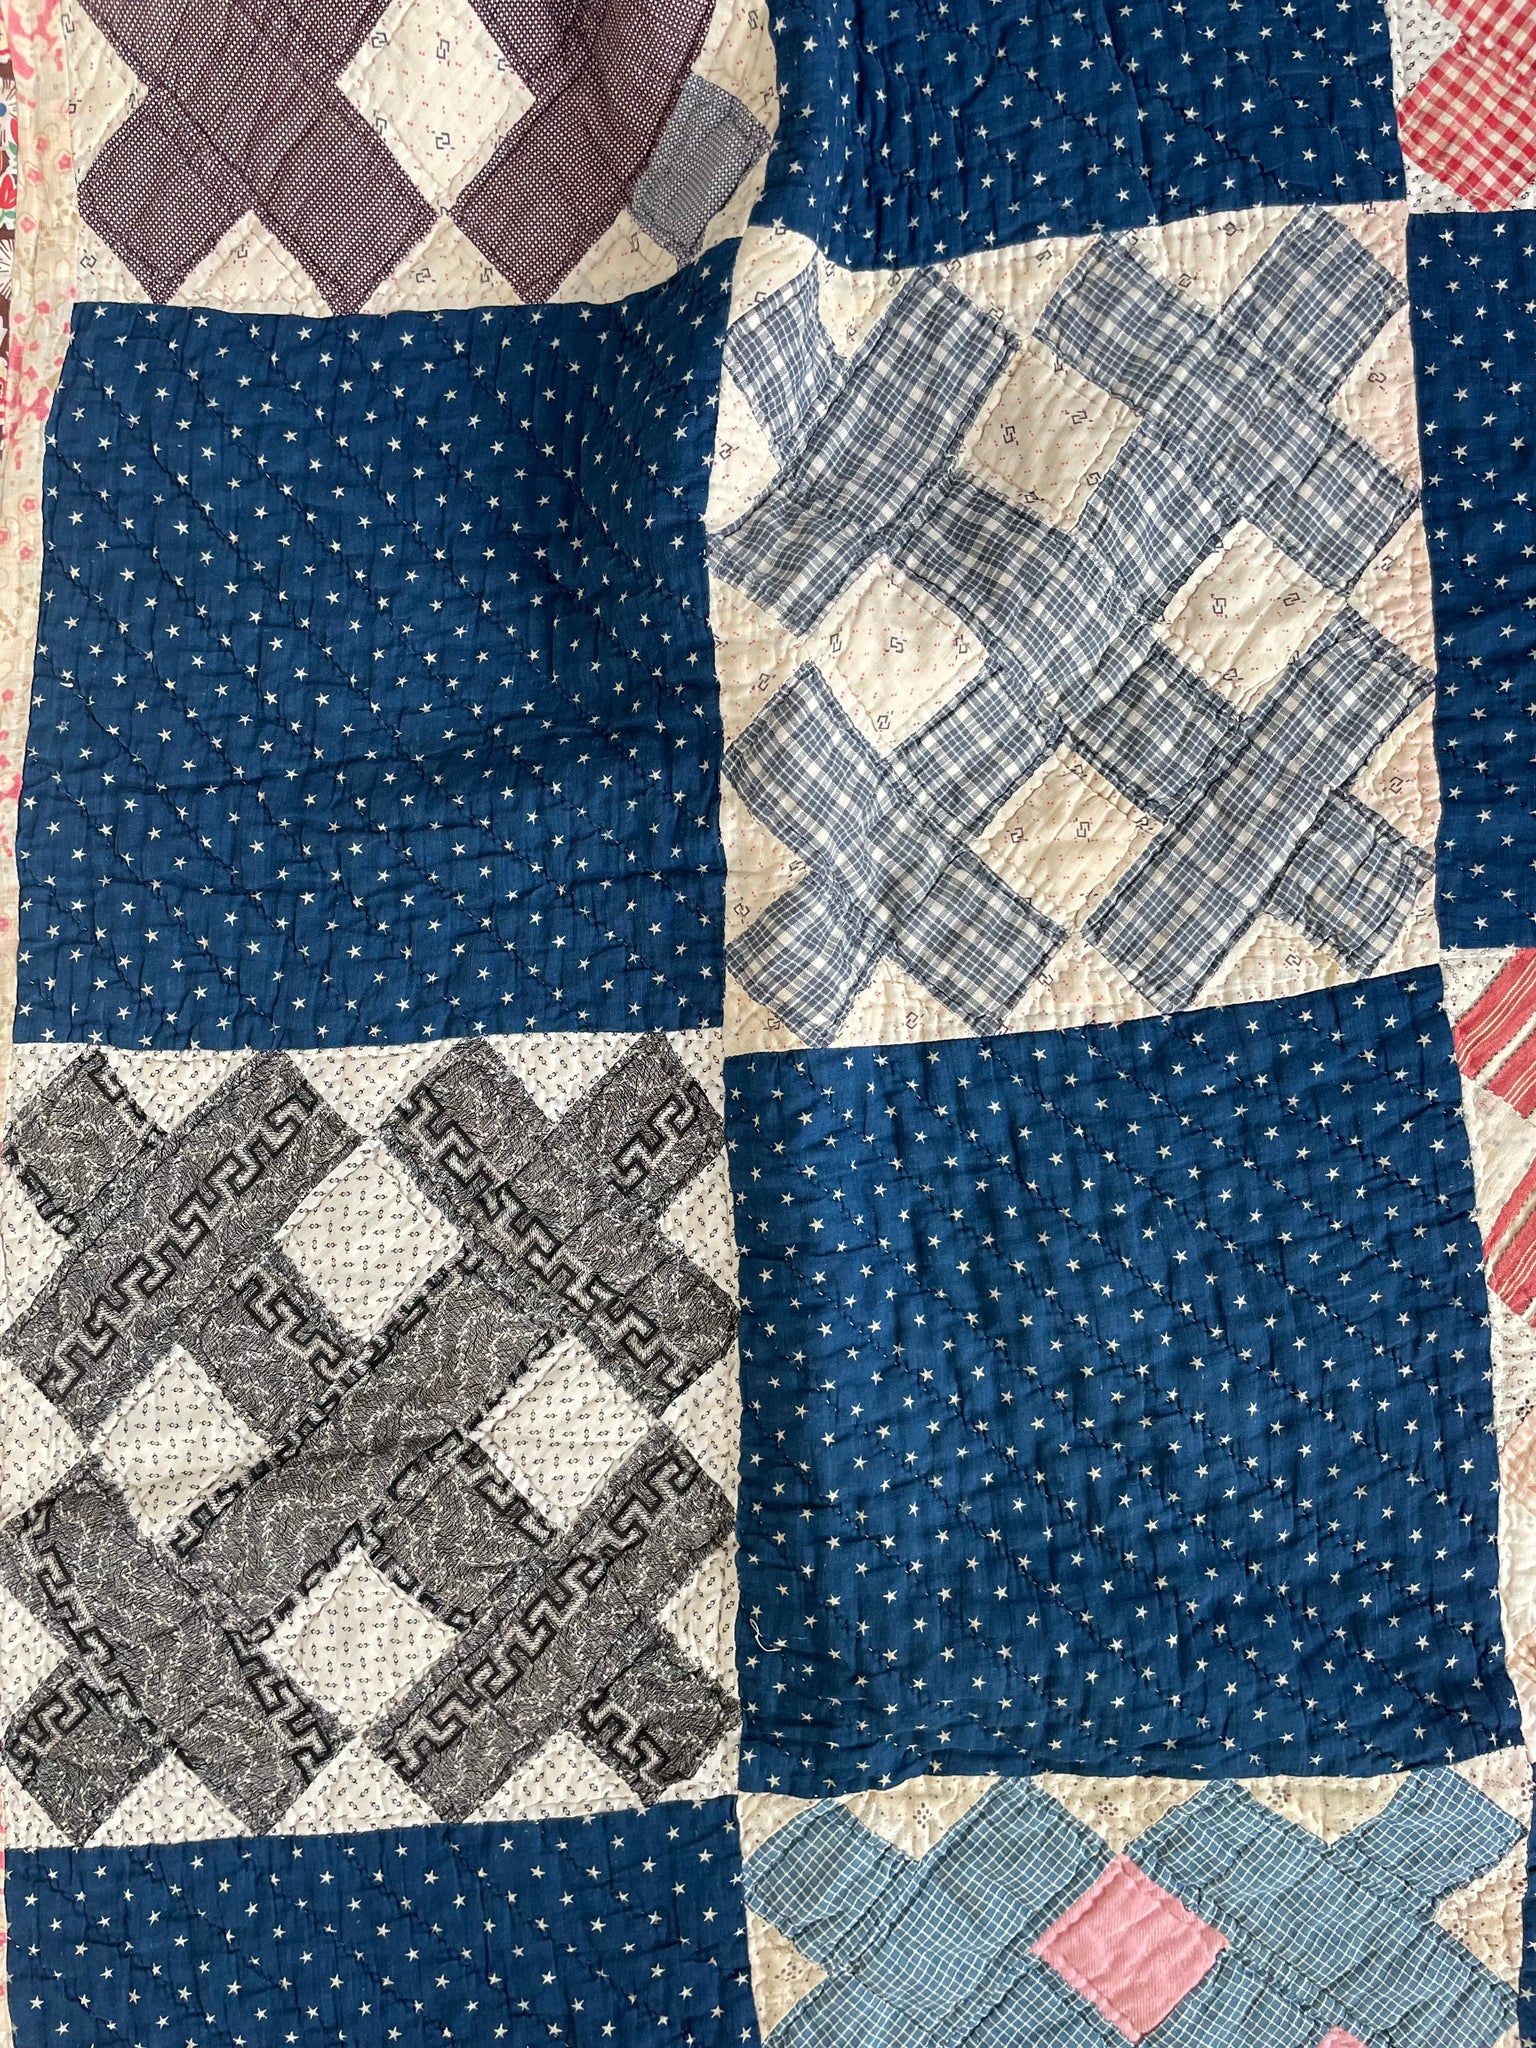 Early 1900s  Calico Patchwork Hand Stitched Quilt